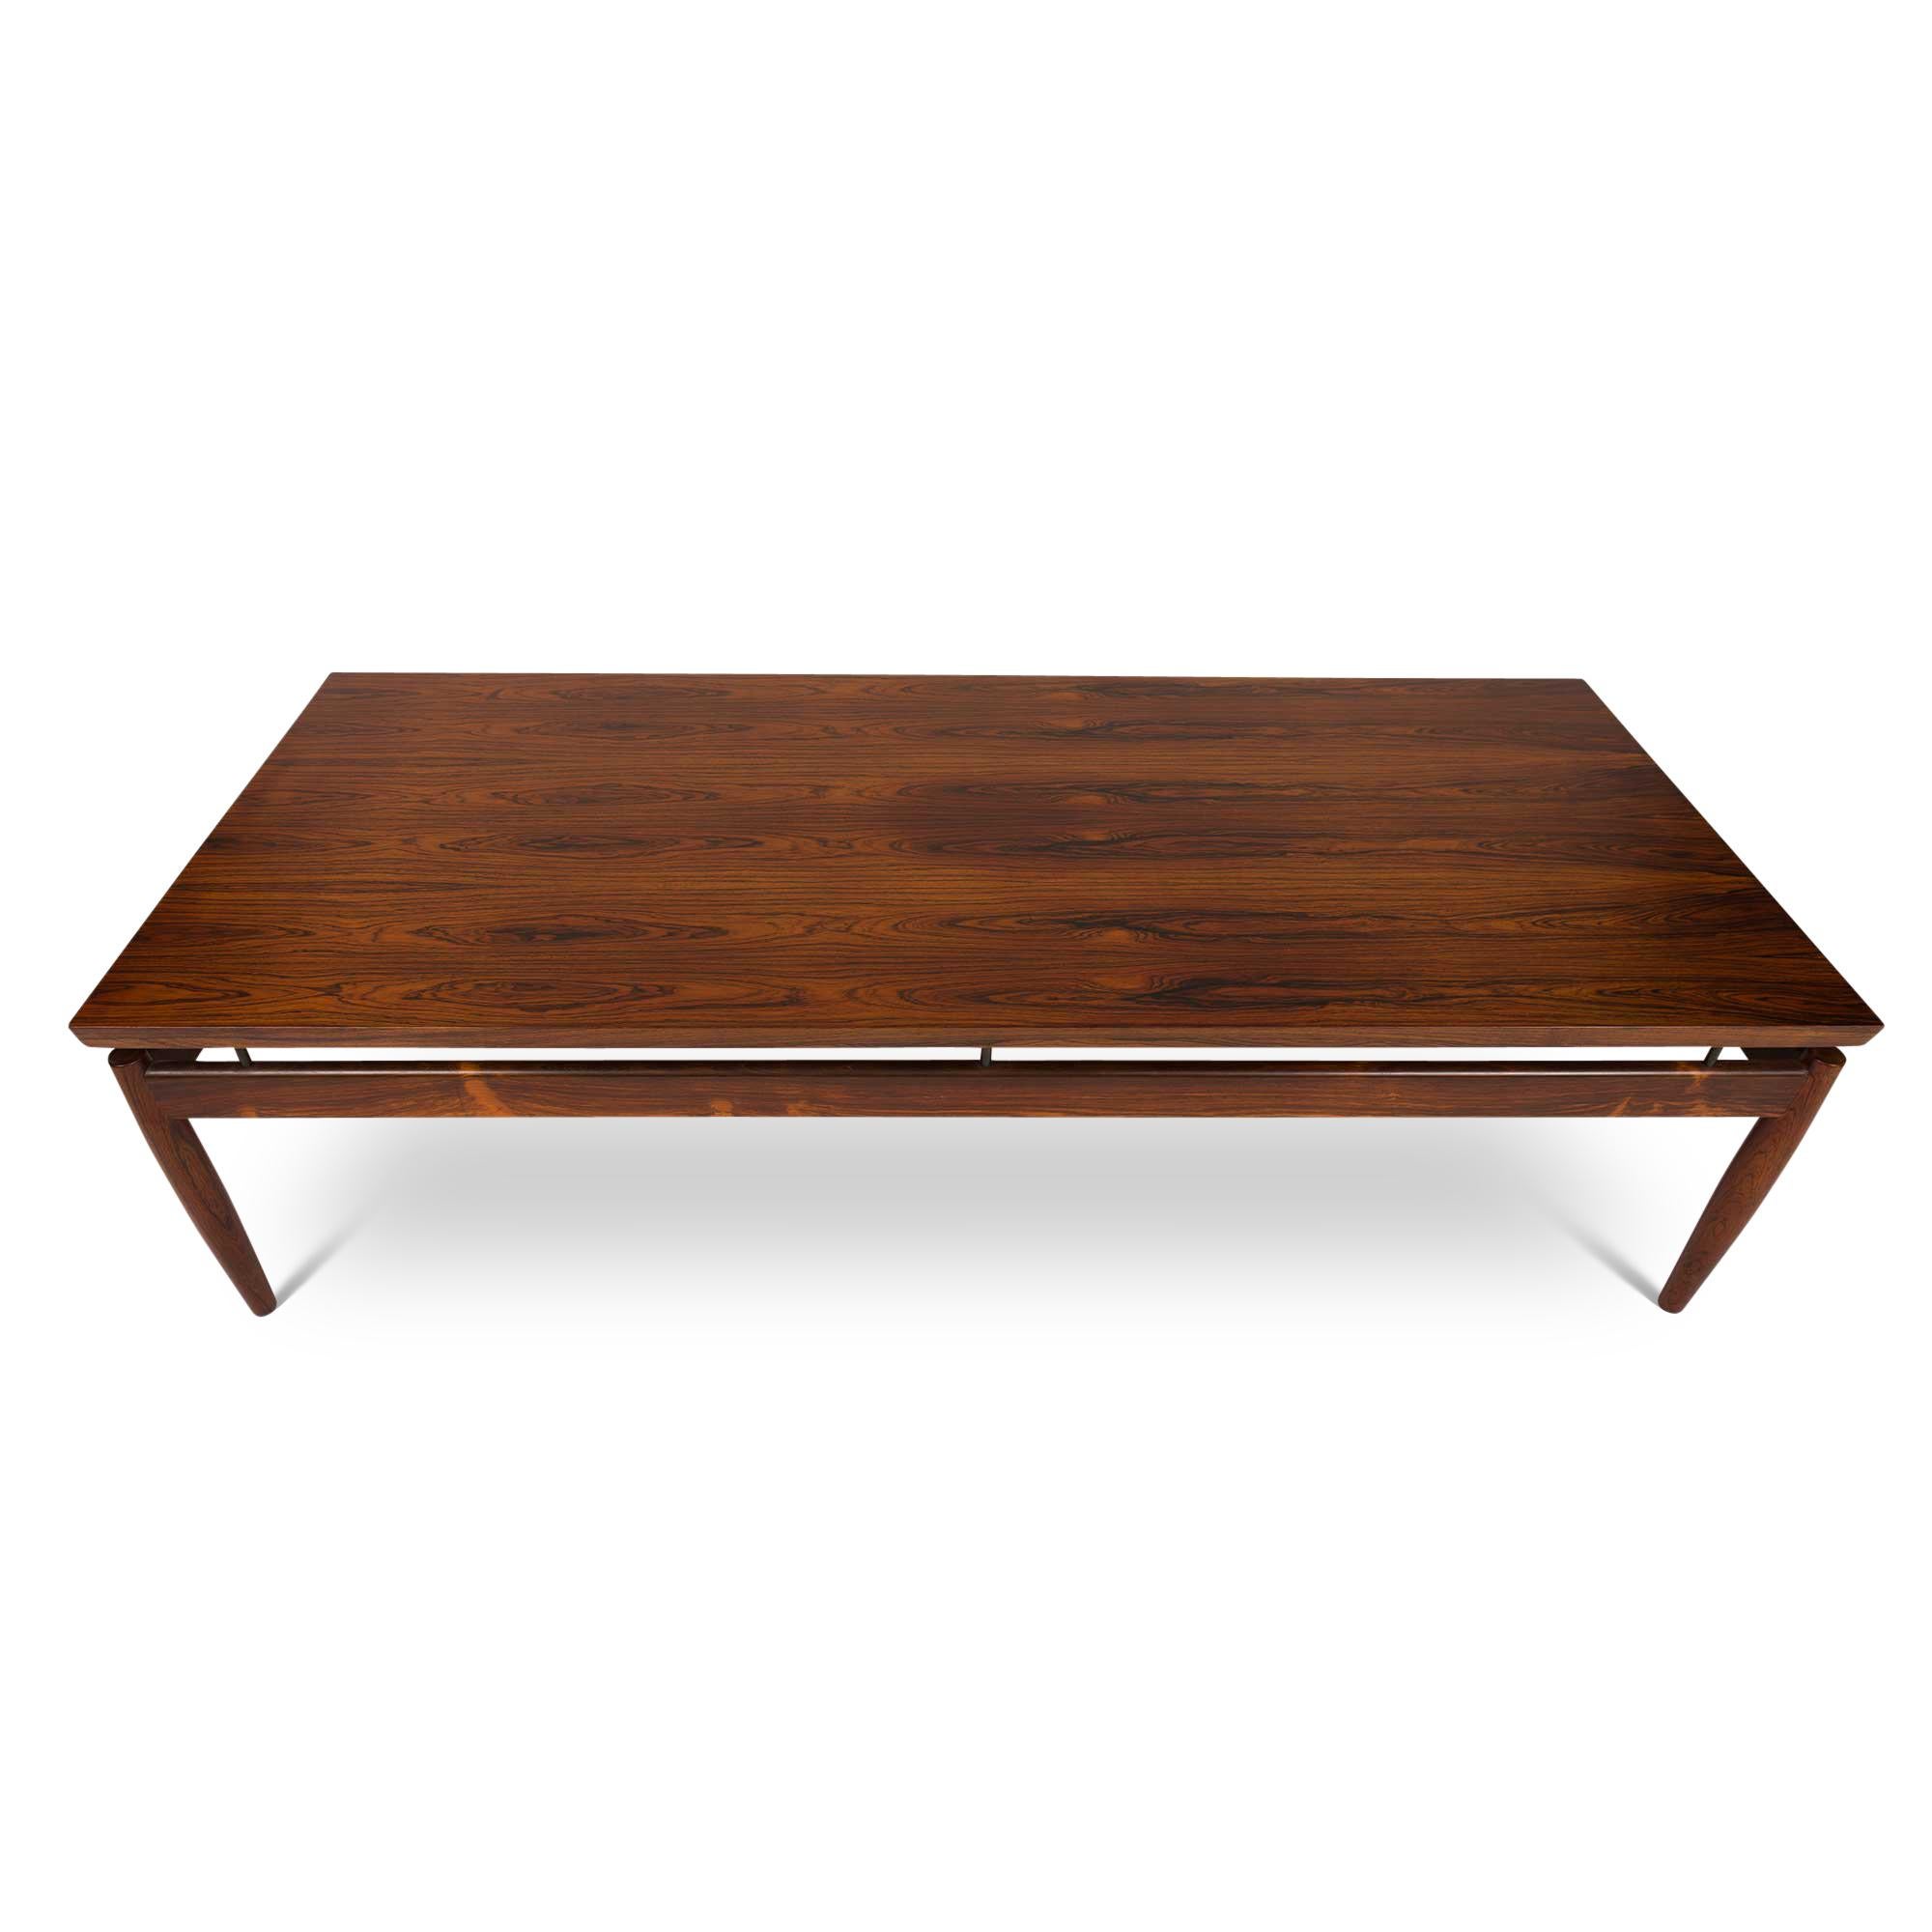 This rare and elegant rosewood coffee table with a floating tabletop (model 622/40) was designed by the Danish designer Grete Jalk for  France & Søn / France & Daverkosen in the 1960s. This coffee table has a stunning rosewood grain throughout the